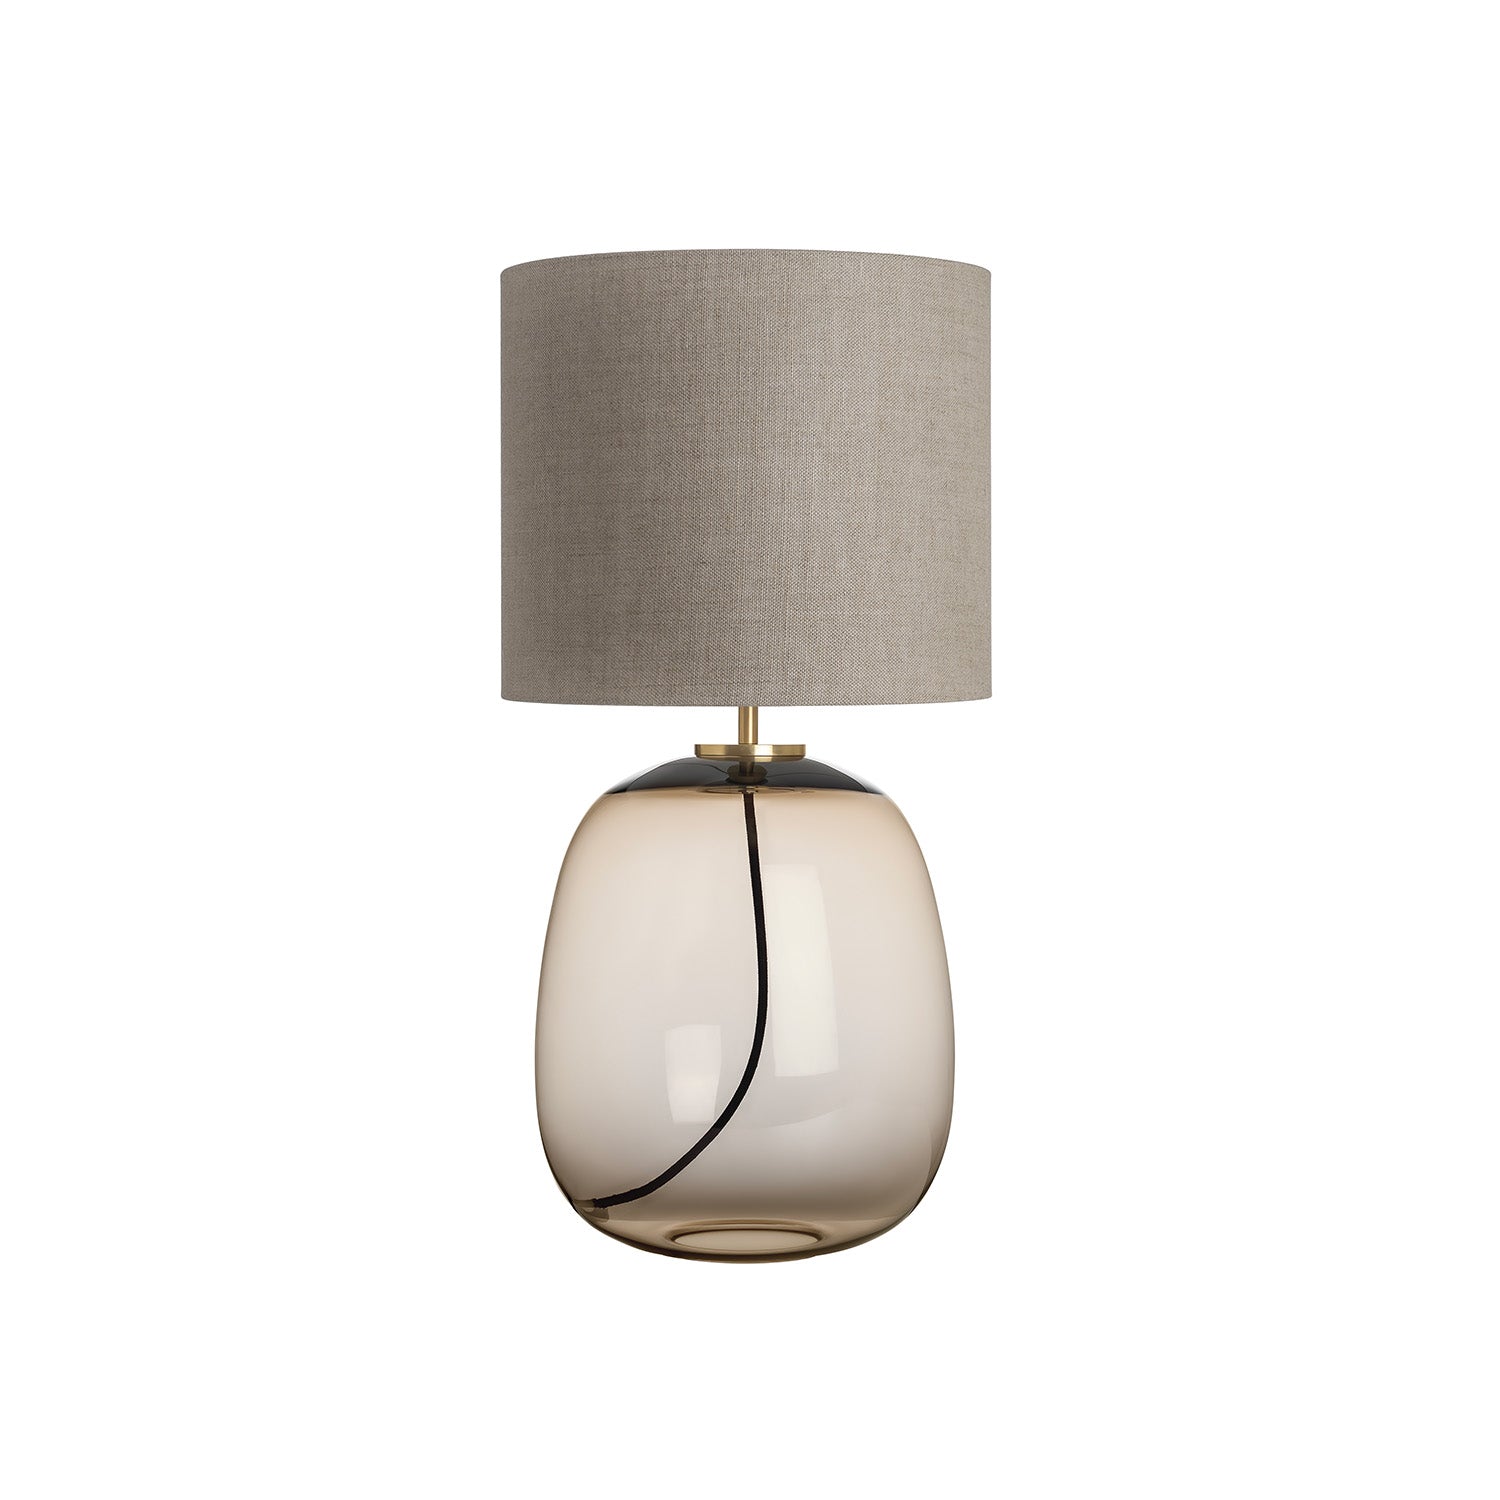 AUSTRA - Handcrafted blown glass table lamp